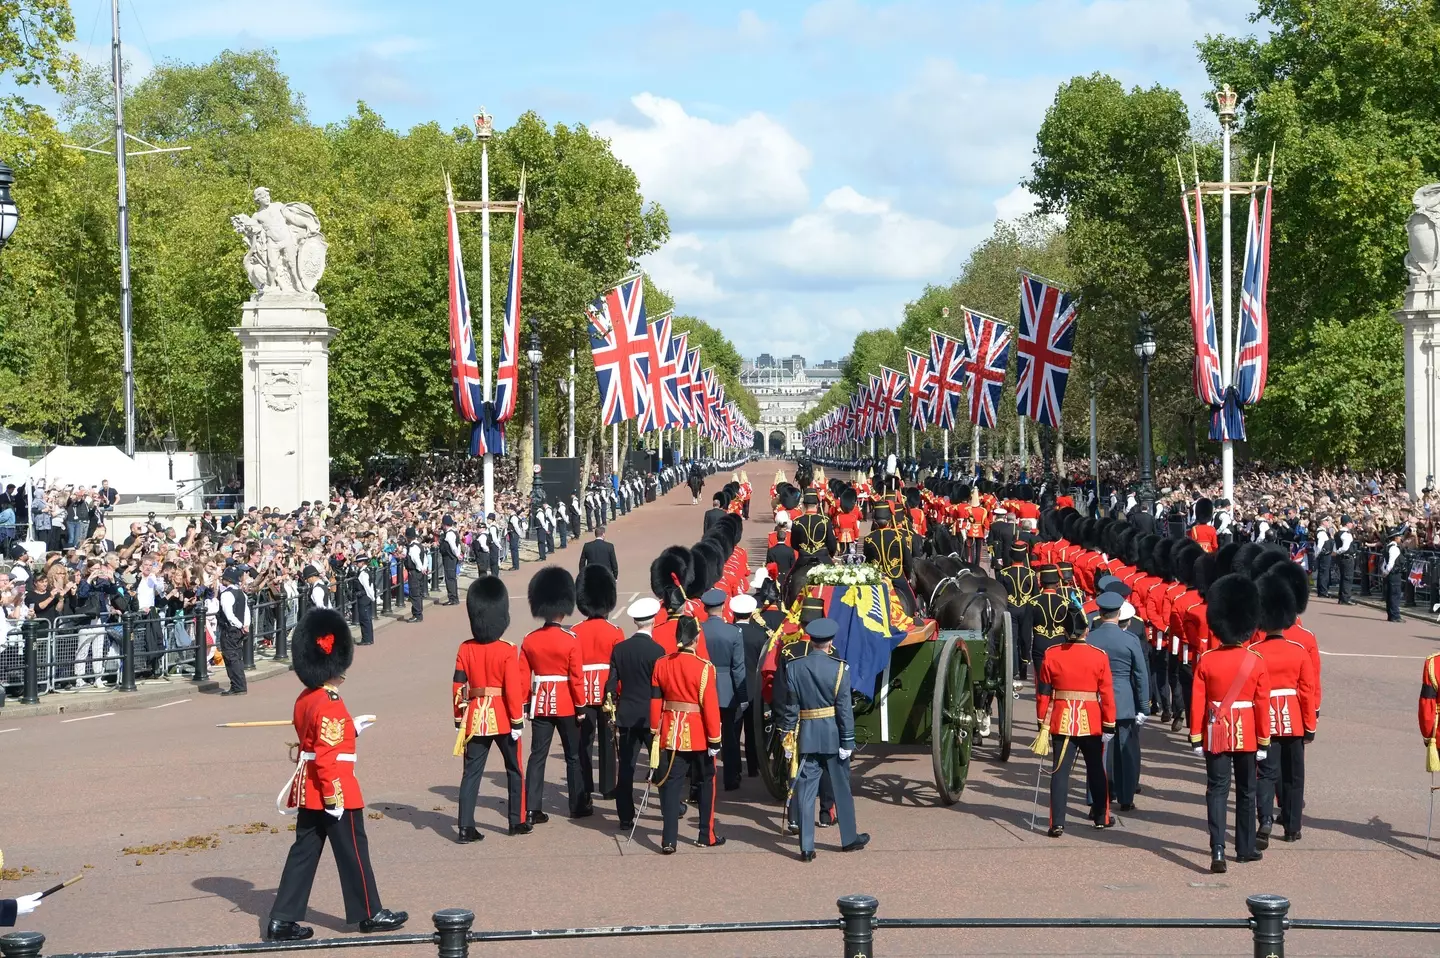 Services for the Queen's funeral are taking place in multiple locations.